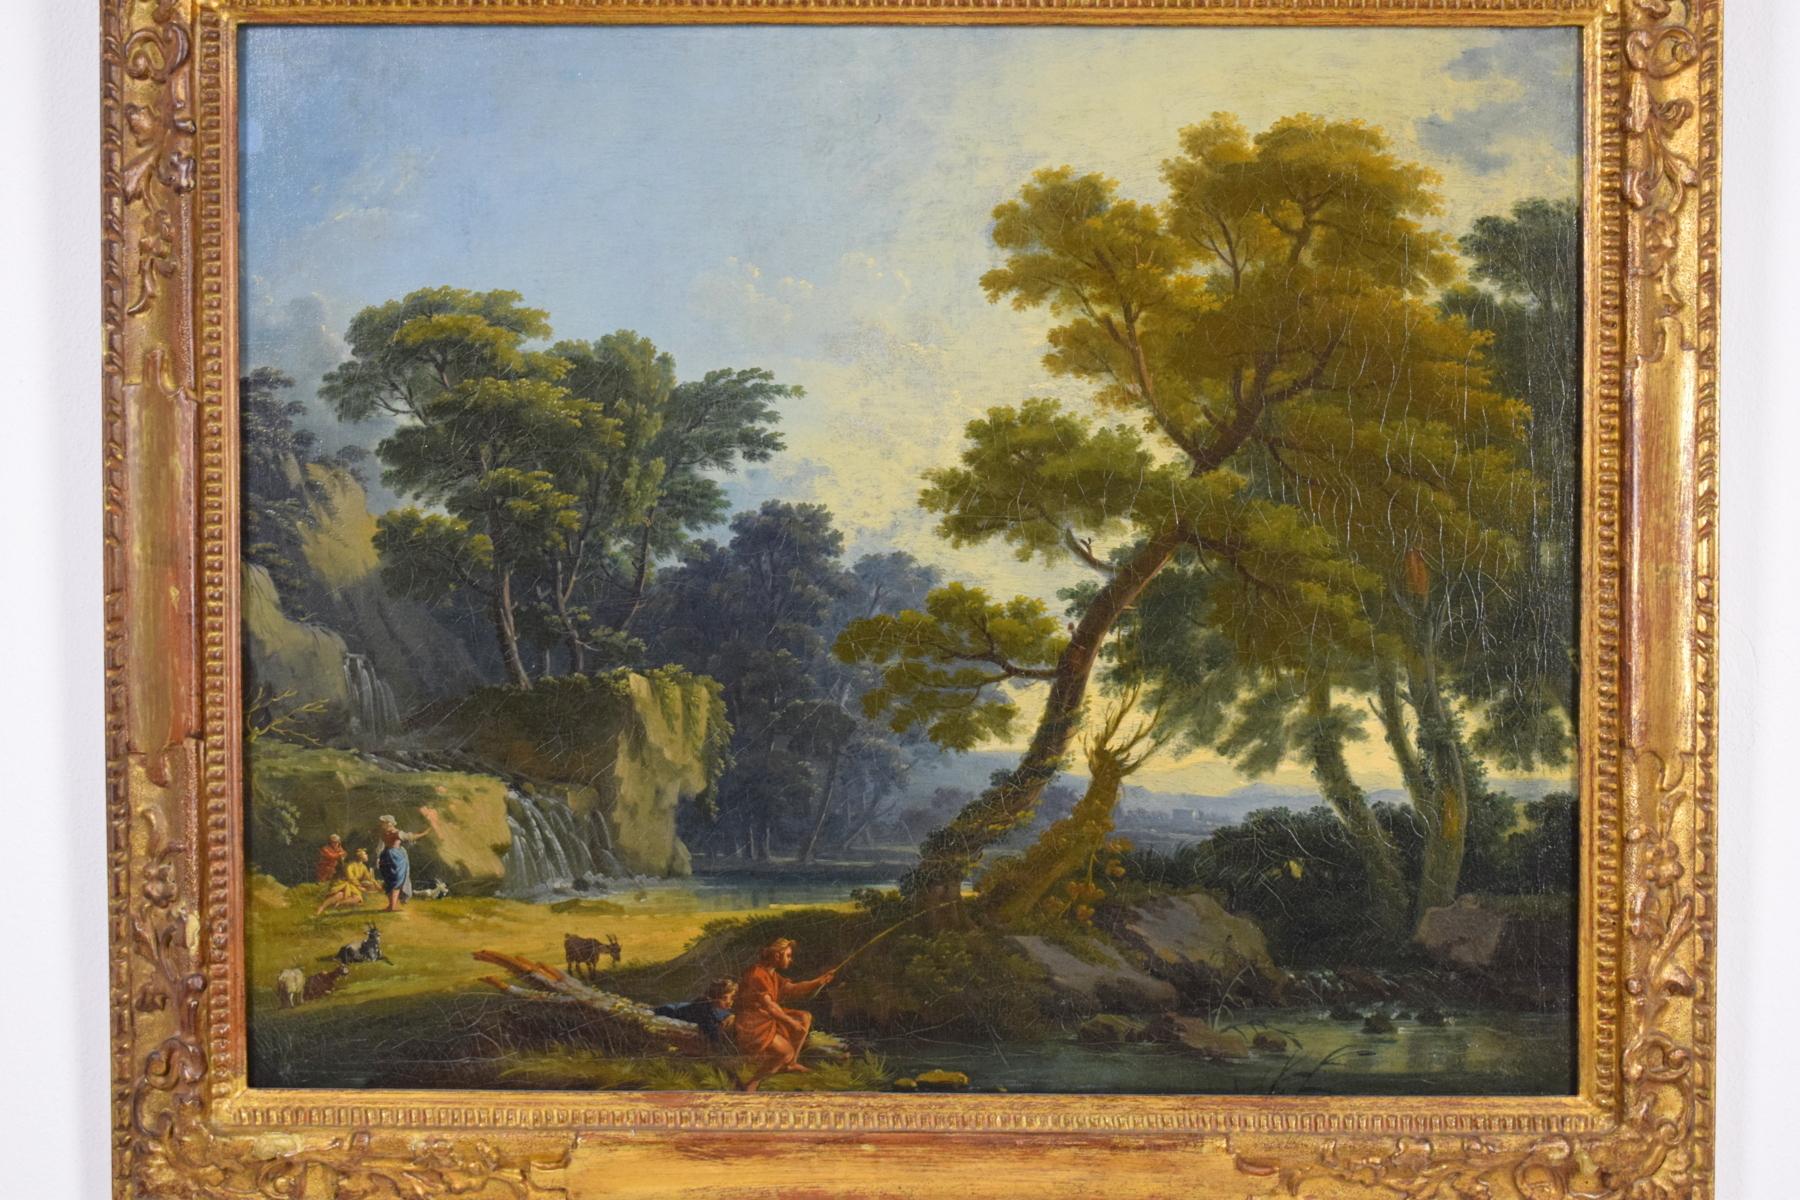 Baroque Giuseppe Zocchi 'Attributed' Oil on Canvas, Landscape with Figures